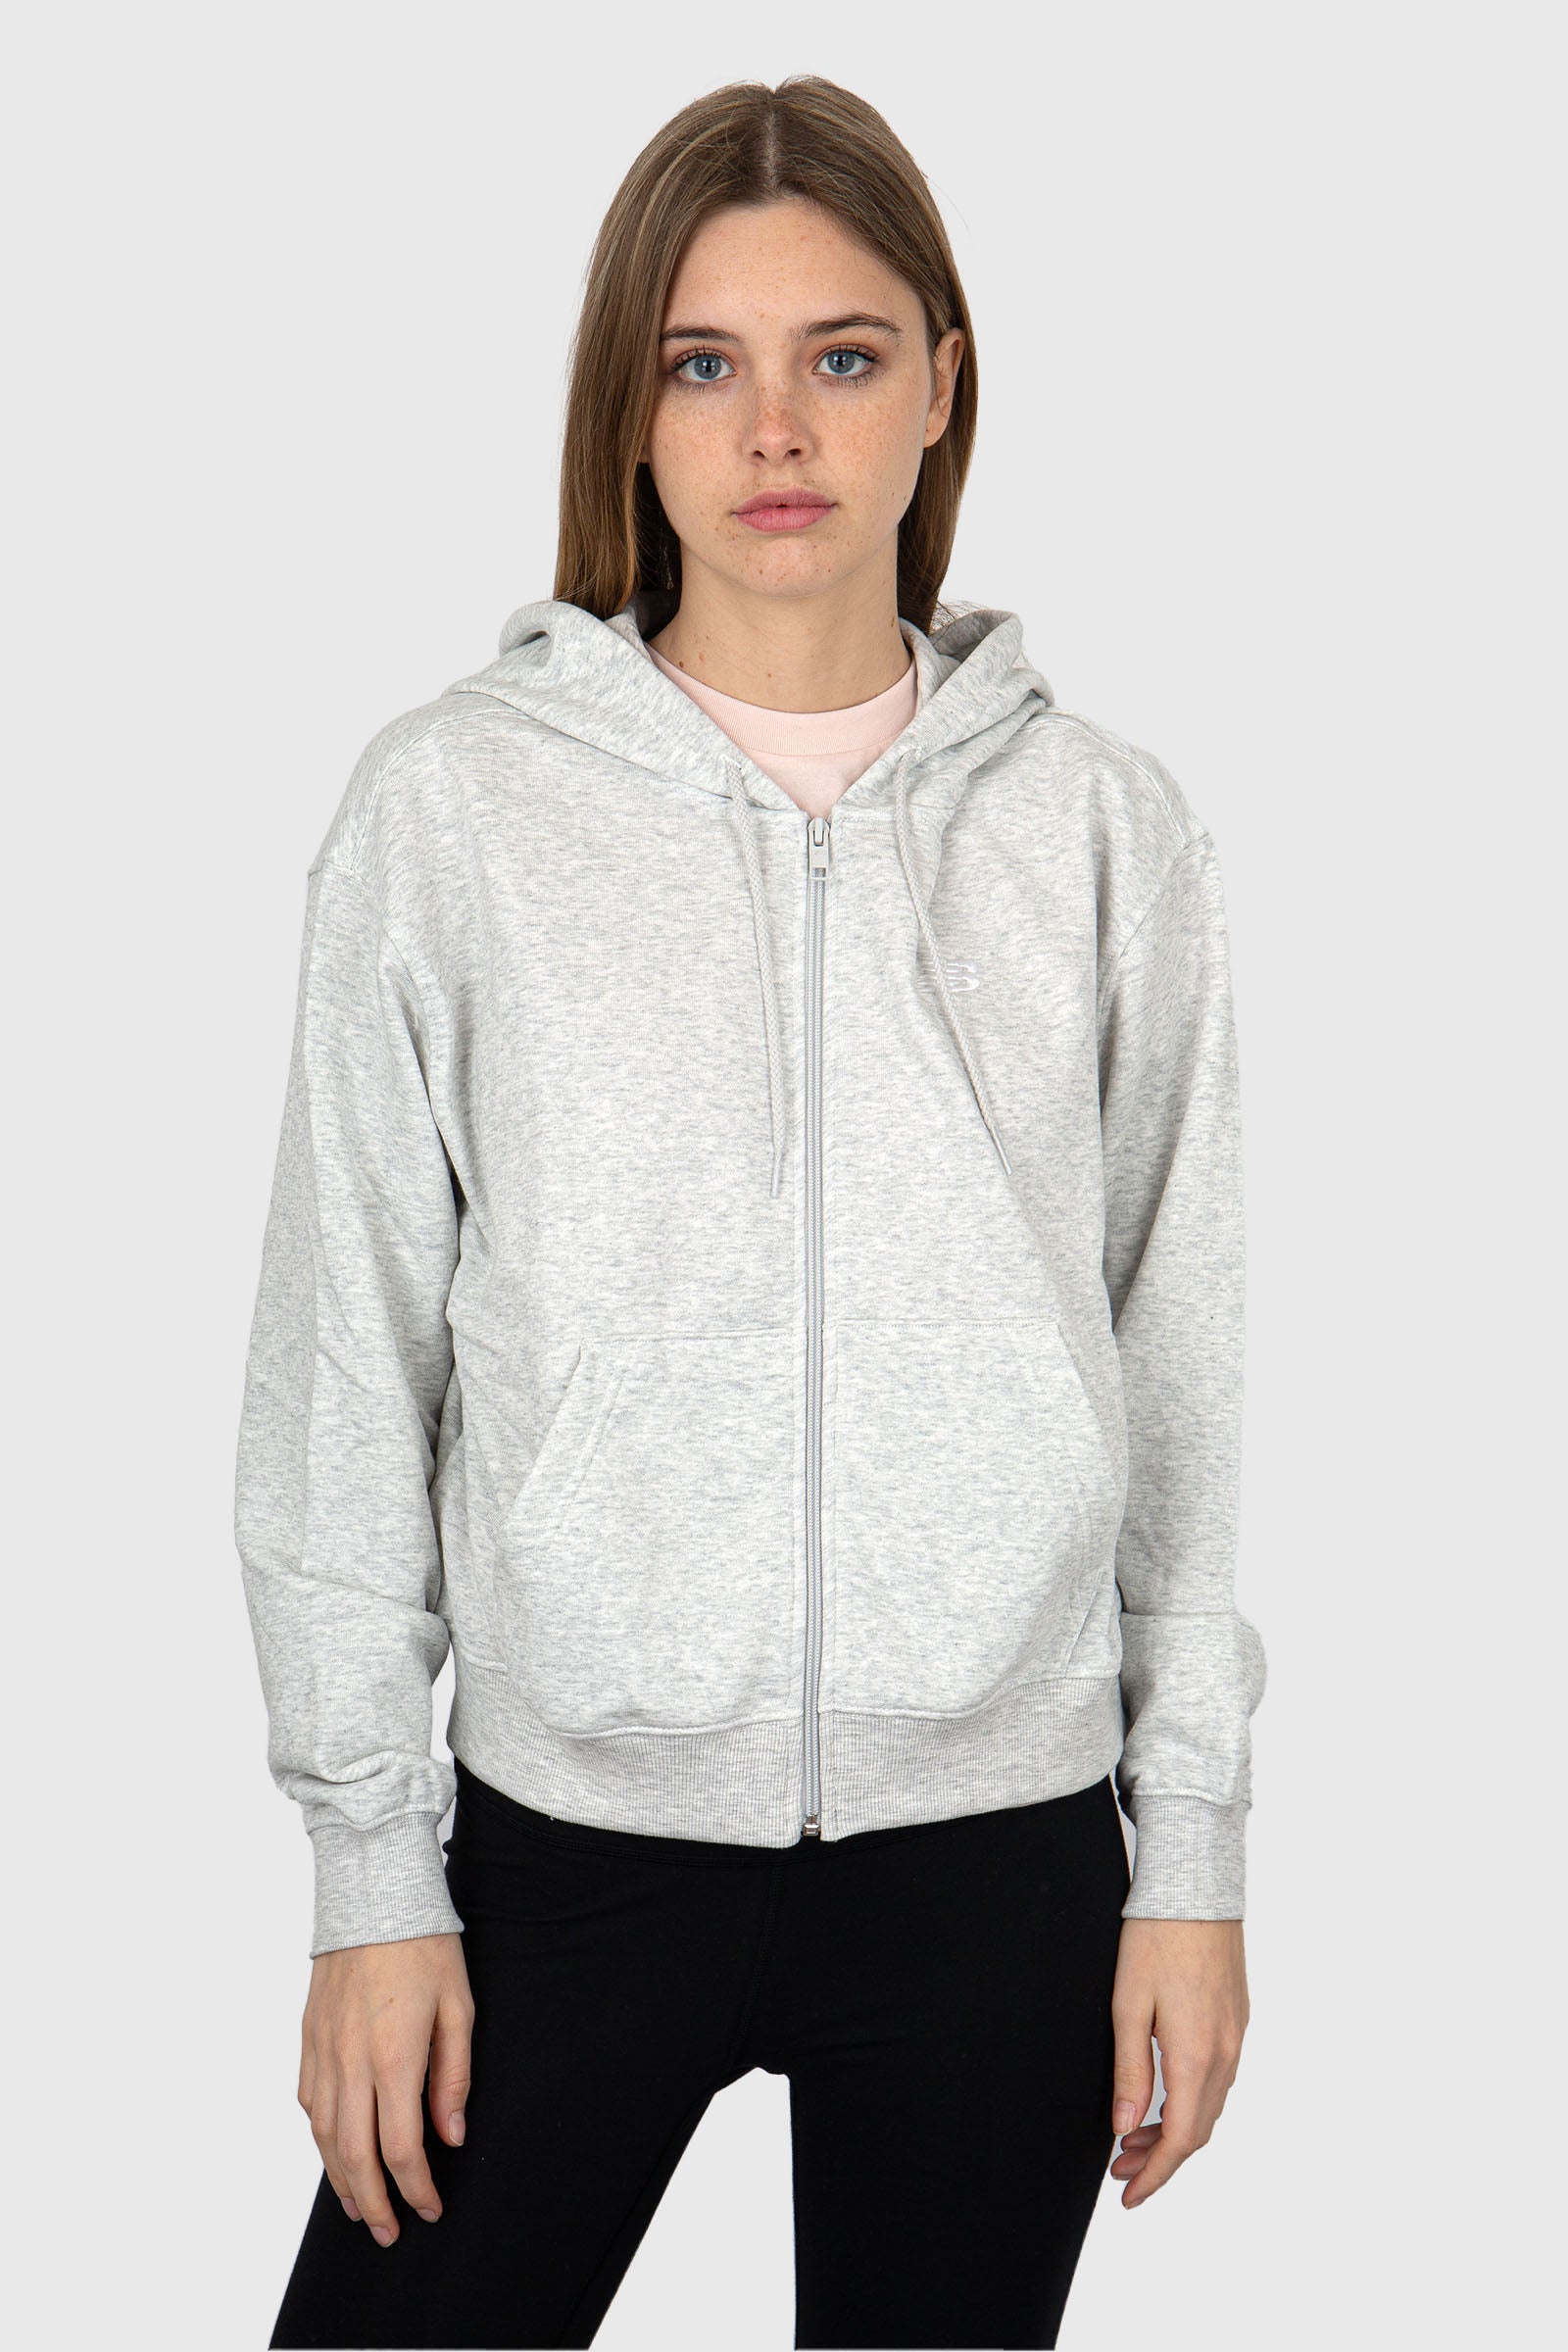 New Balance French Terry Full Zip Hoodie Cotton Light Grey - 2